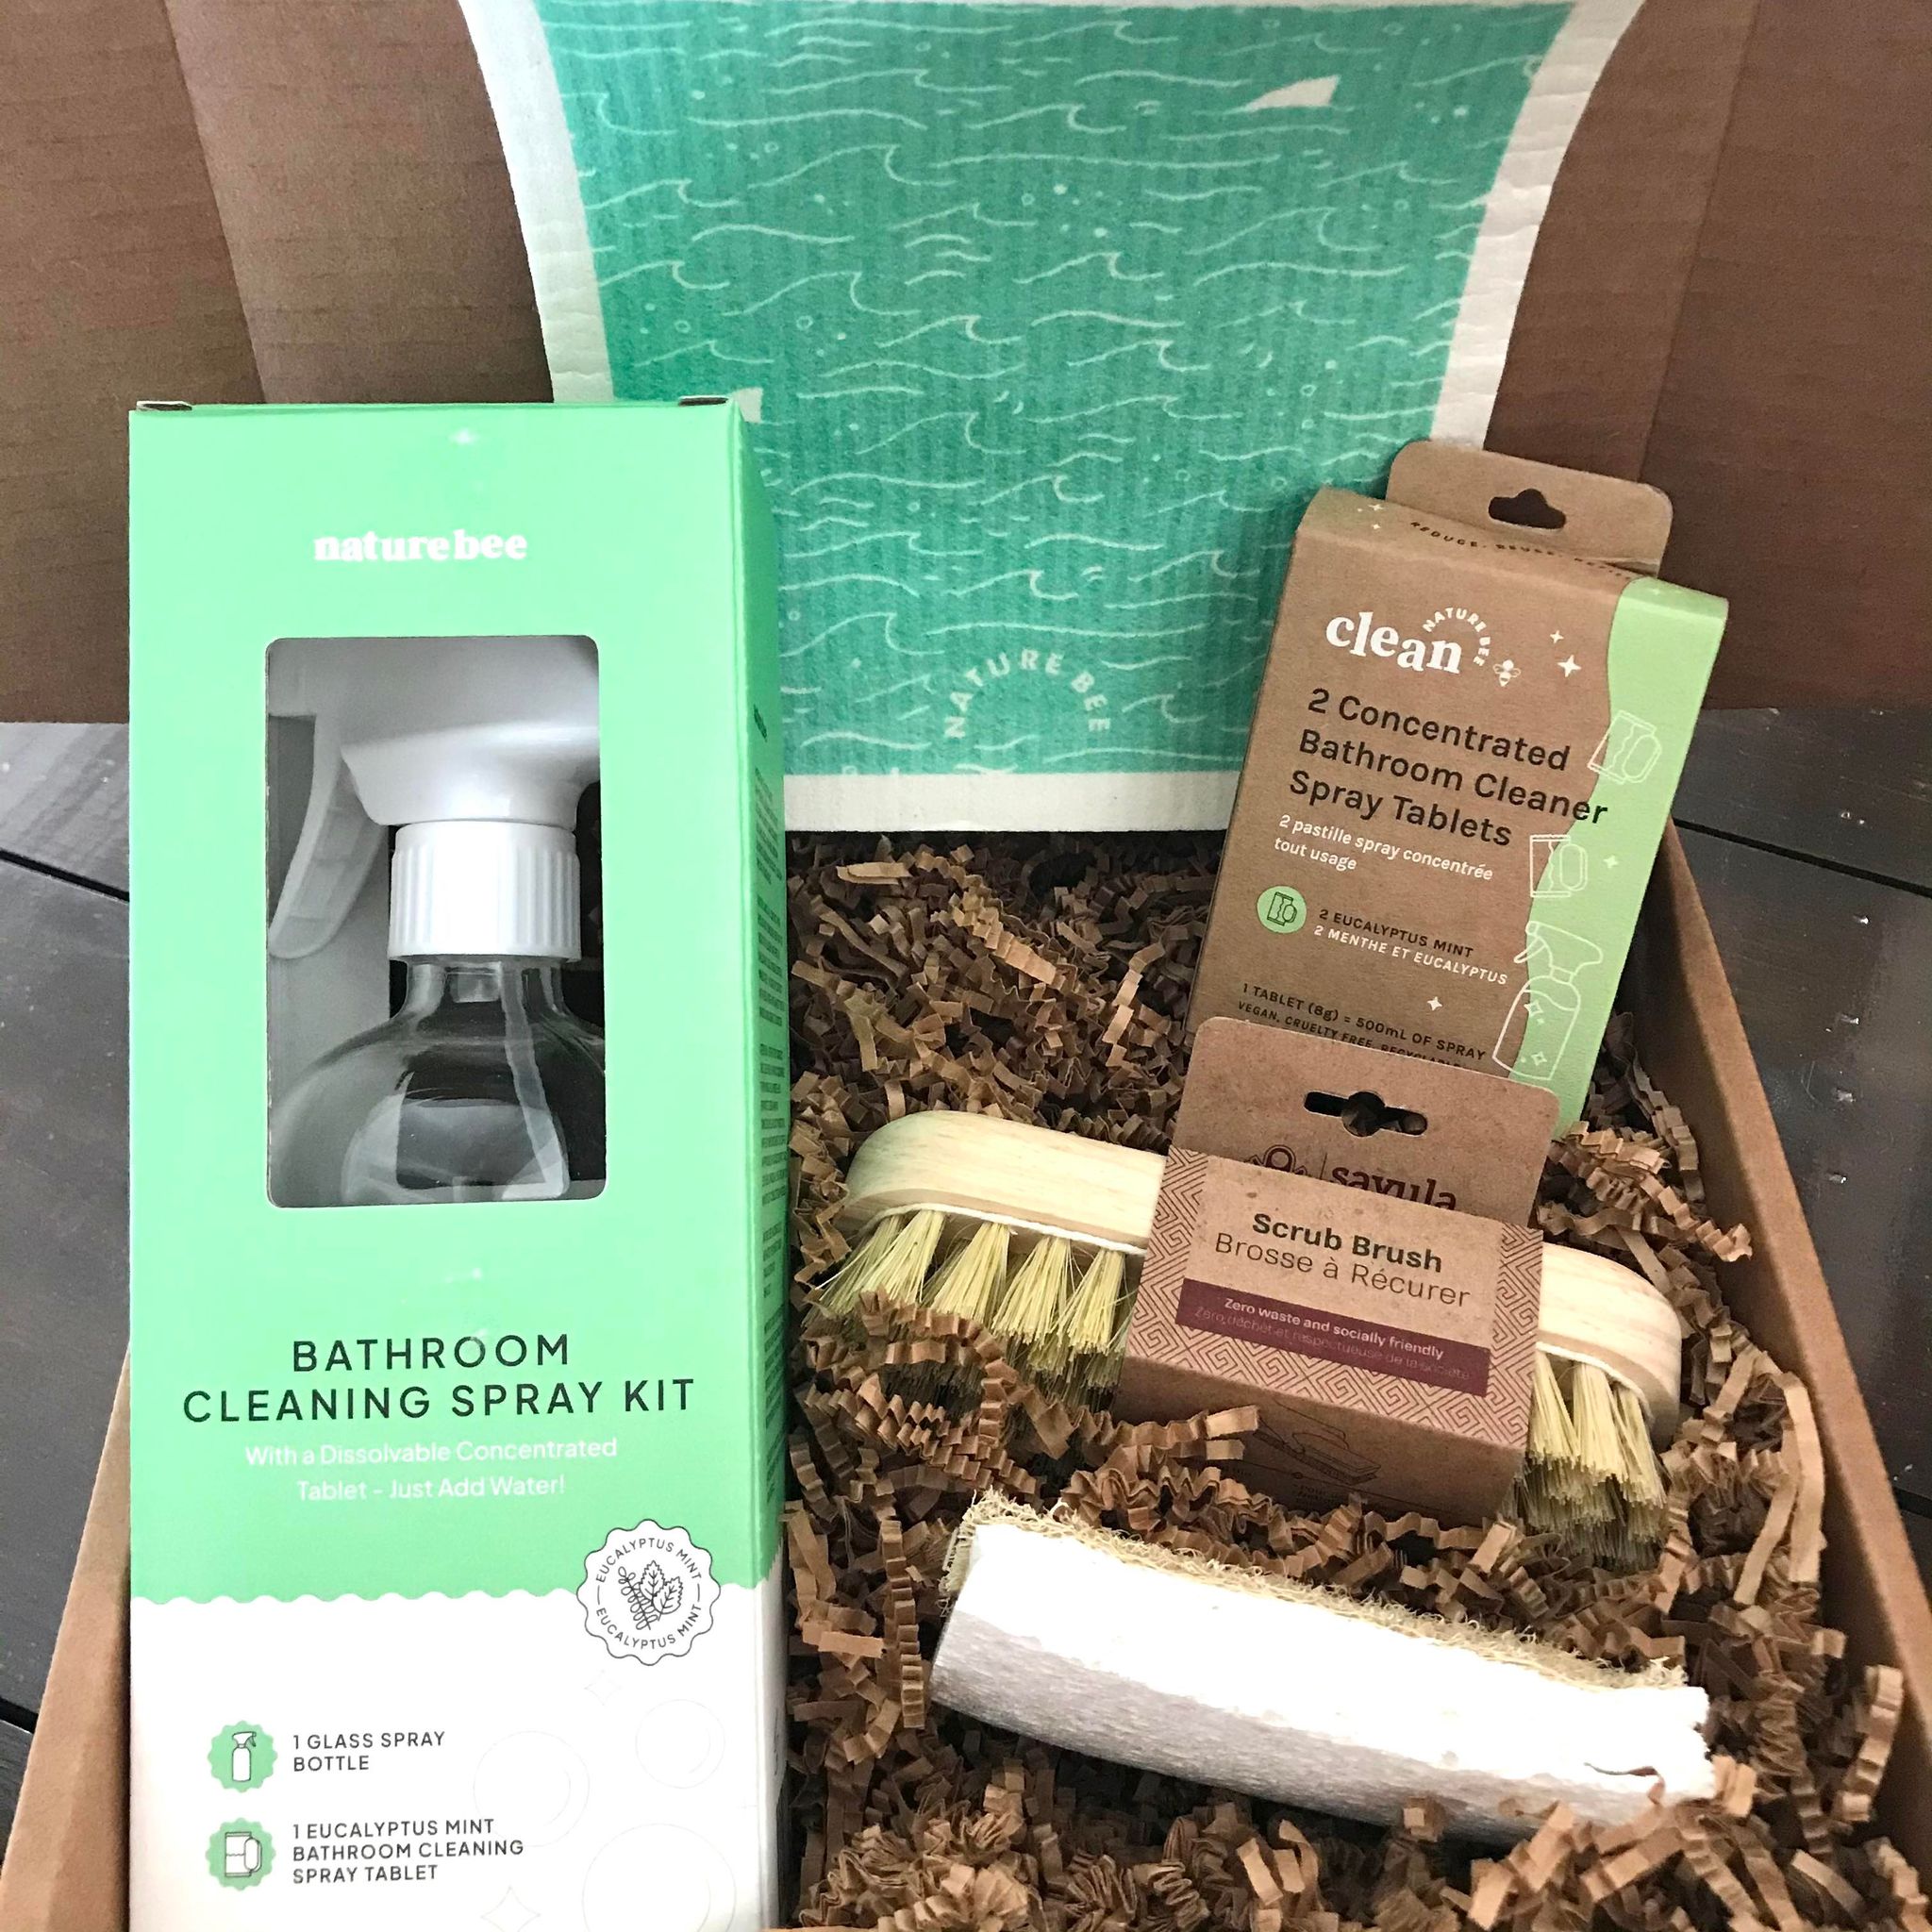 This Nature Bee Clean gift set included a eucalyptus mint bathroom cleaning spray kit, a two pack of concentrated bathroom cleaner tablets, a Sayula scrub brush and an compostable eco sponge which is a combination loofah and celluose sponge